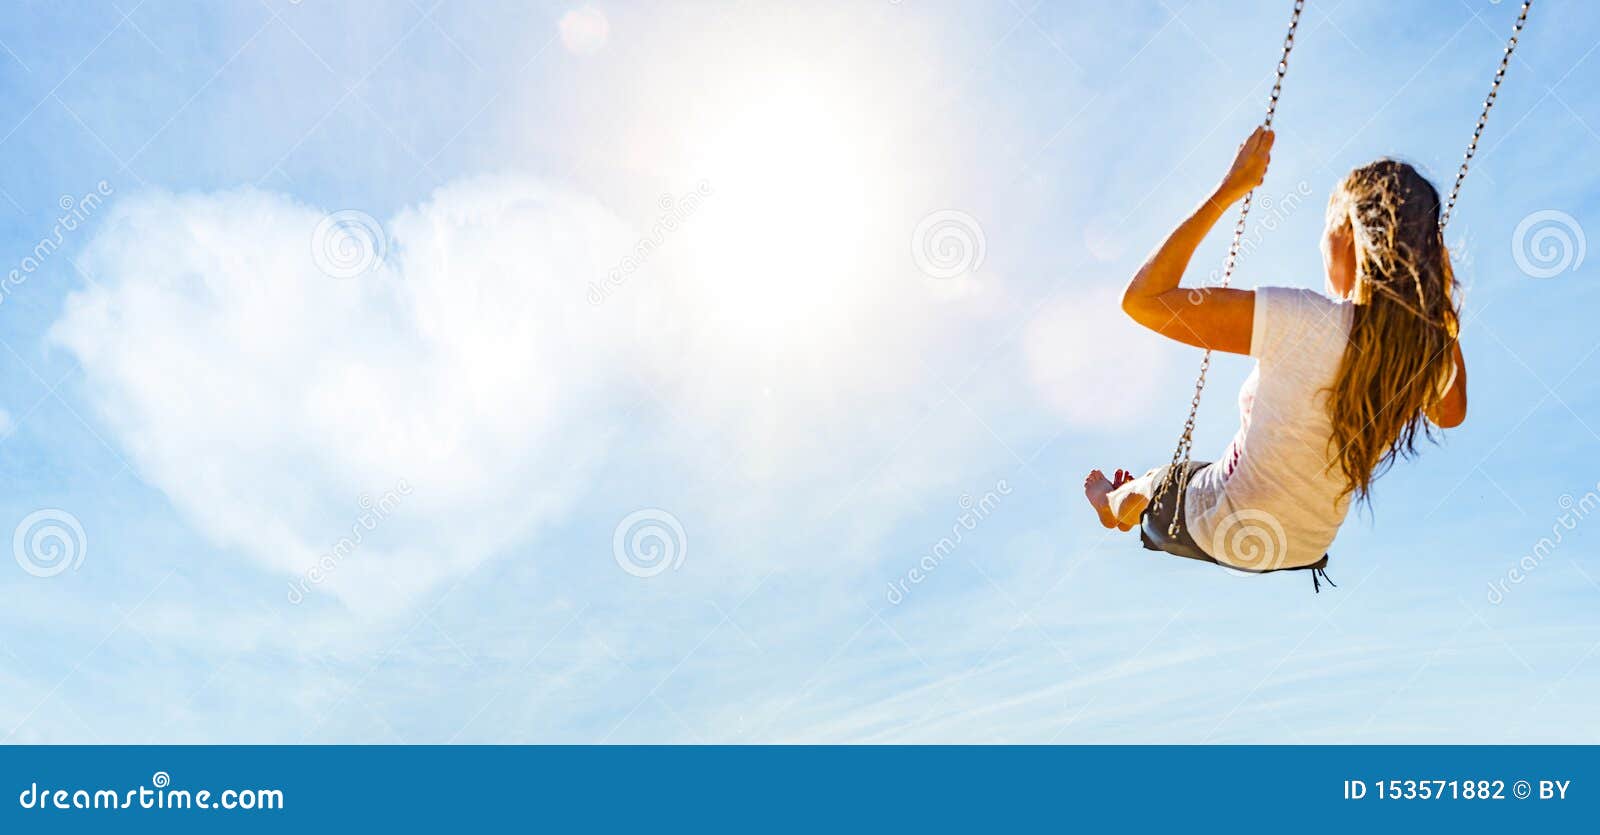 woman on a swing with blue sky and heart-d cloud